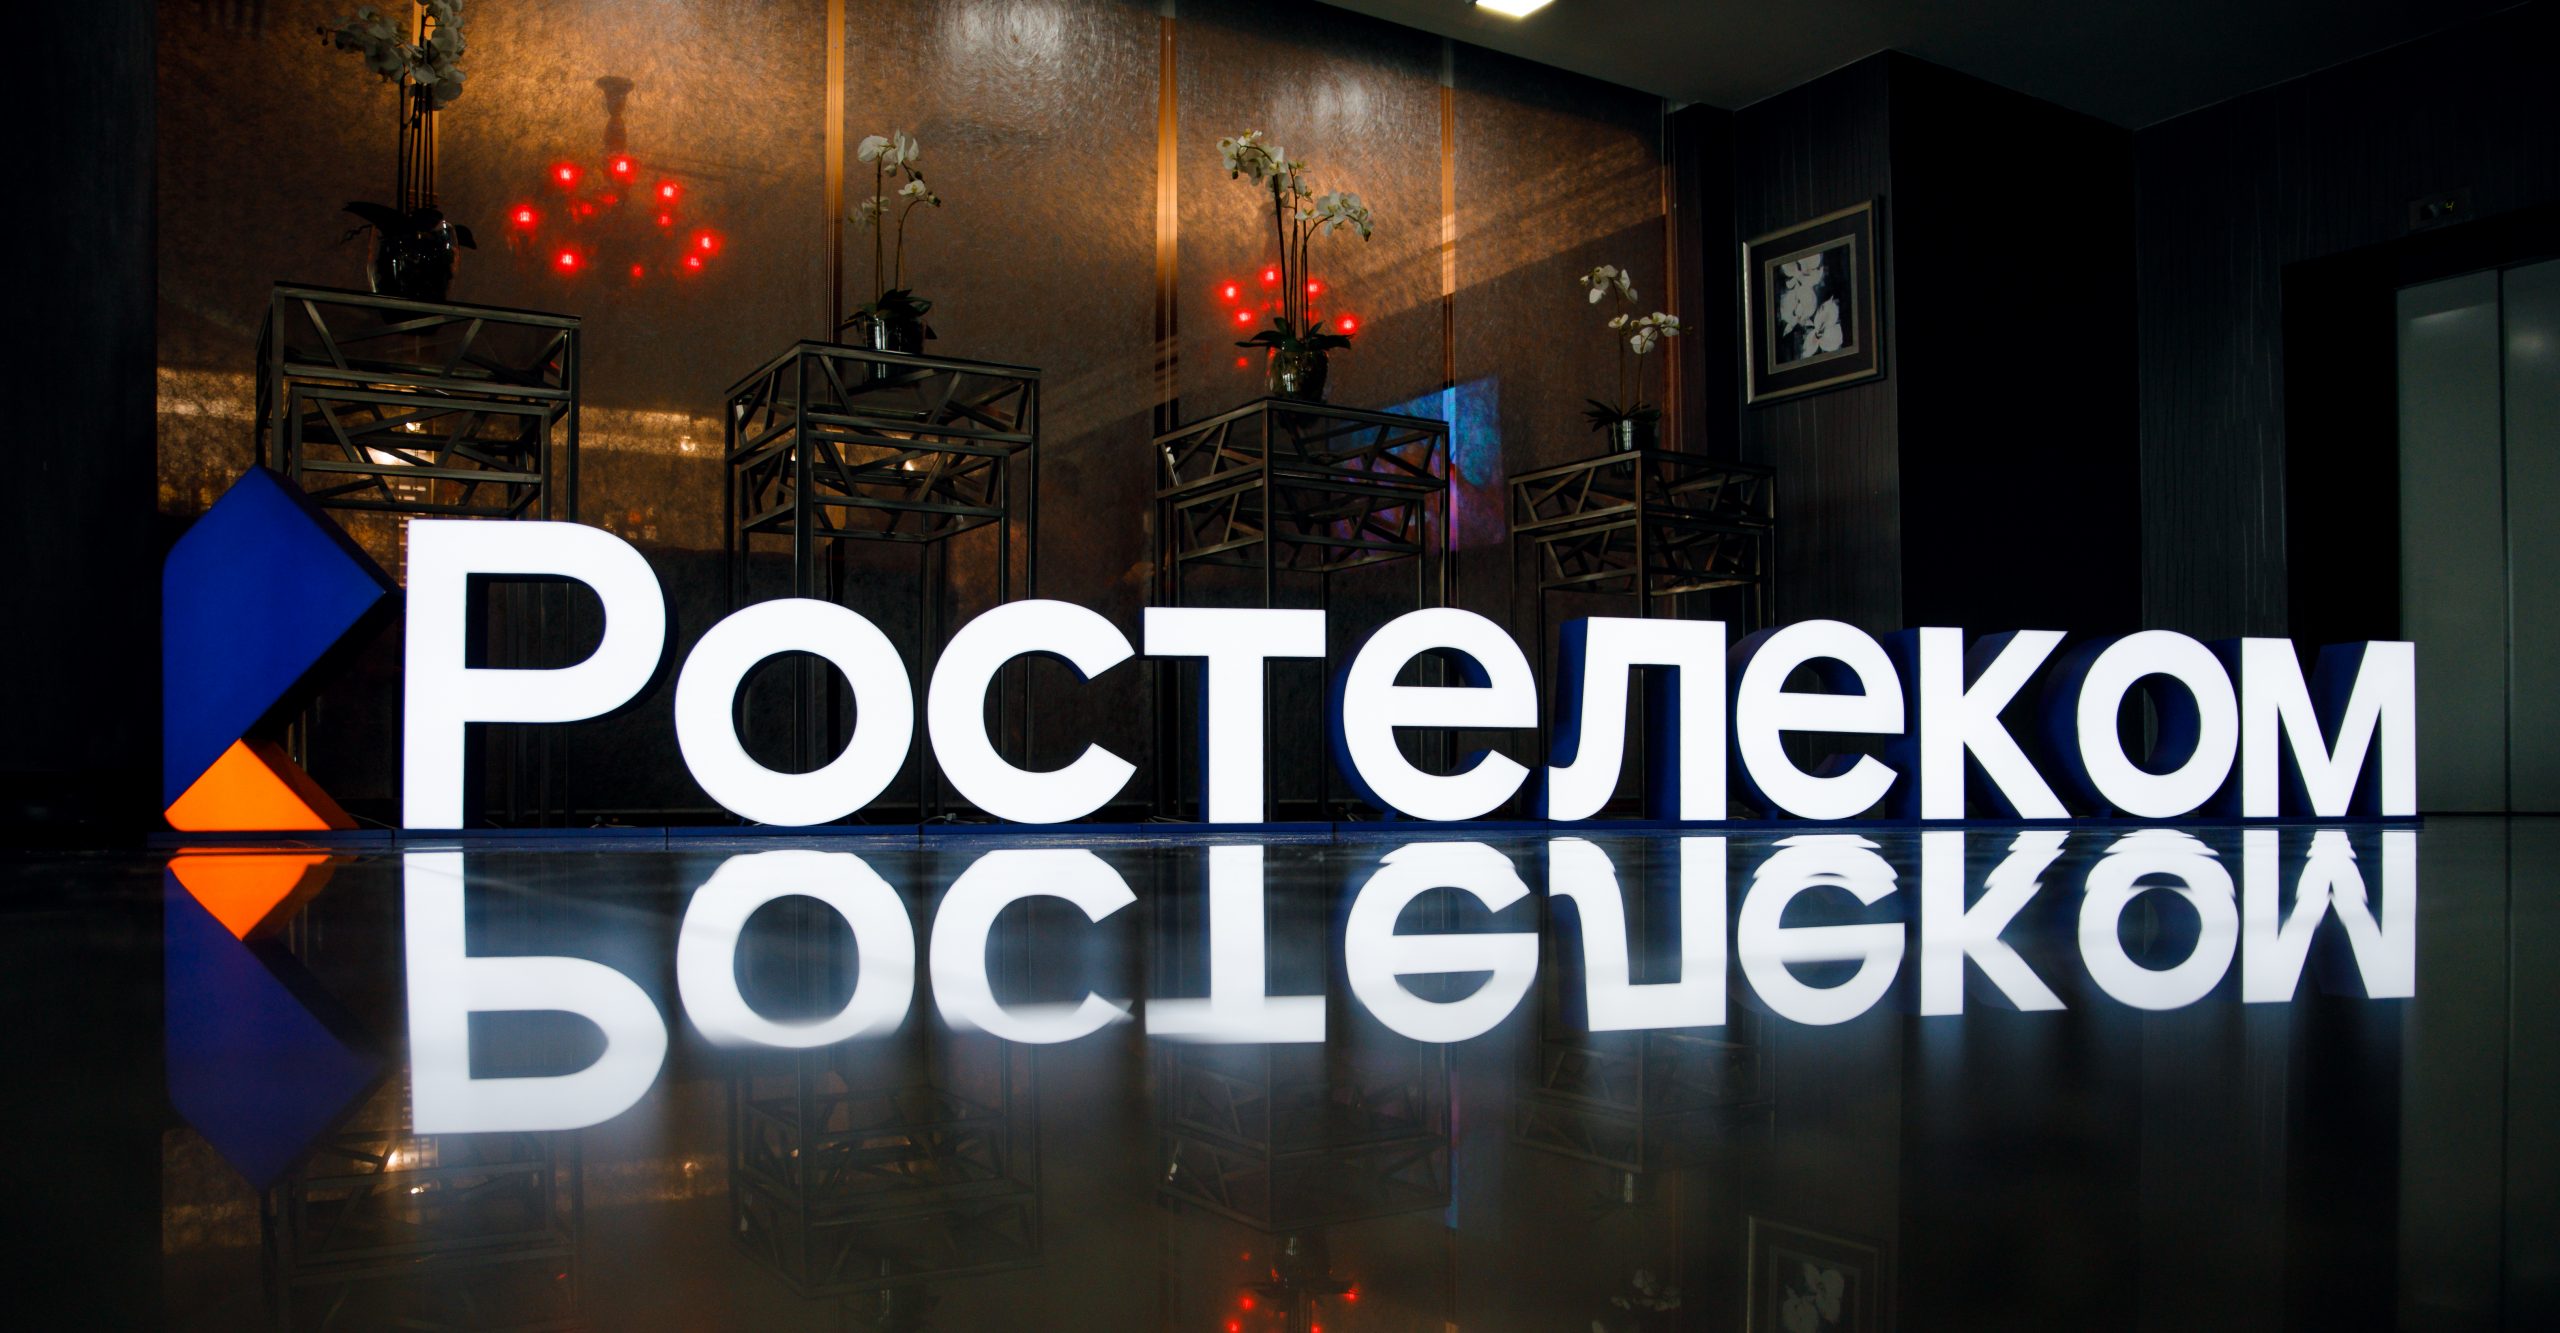 Rostelecom is completing its Key project in 5 regions for 170 million rubles